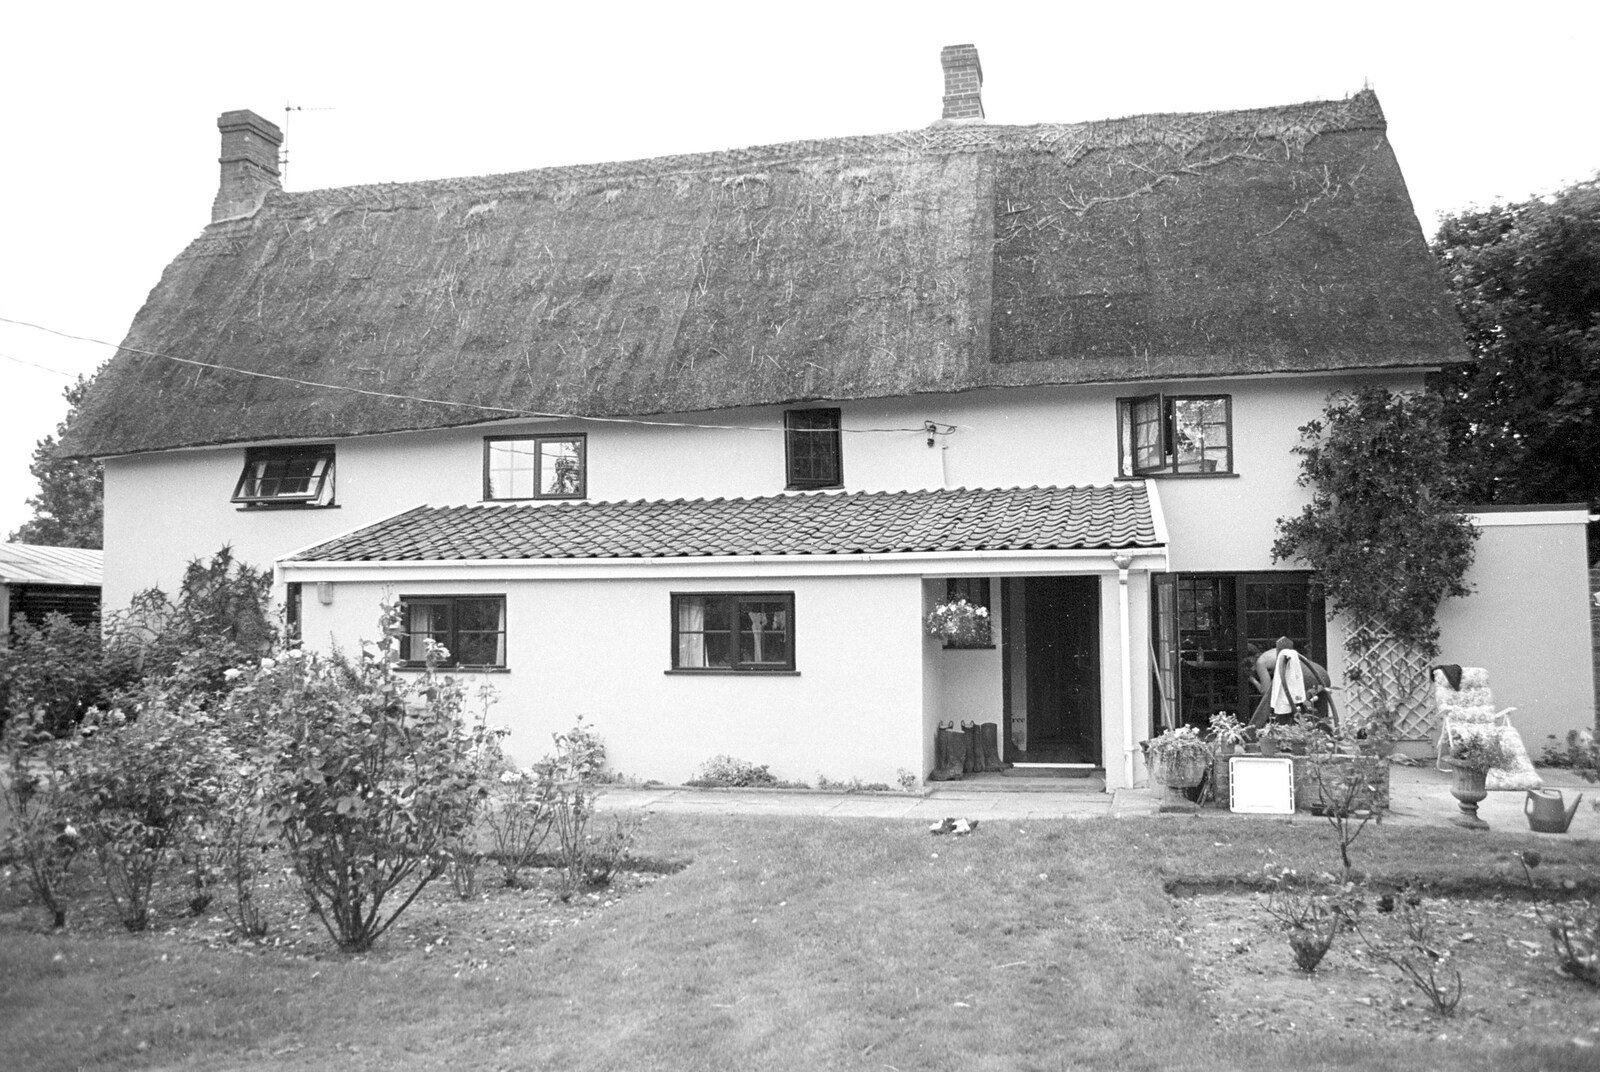 The Ogilsby farmhouse from Working on the Harvest, Tibenham, Norfolk - 11th August 1992